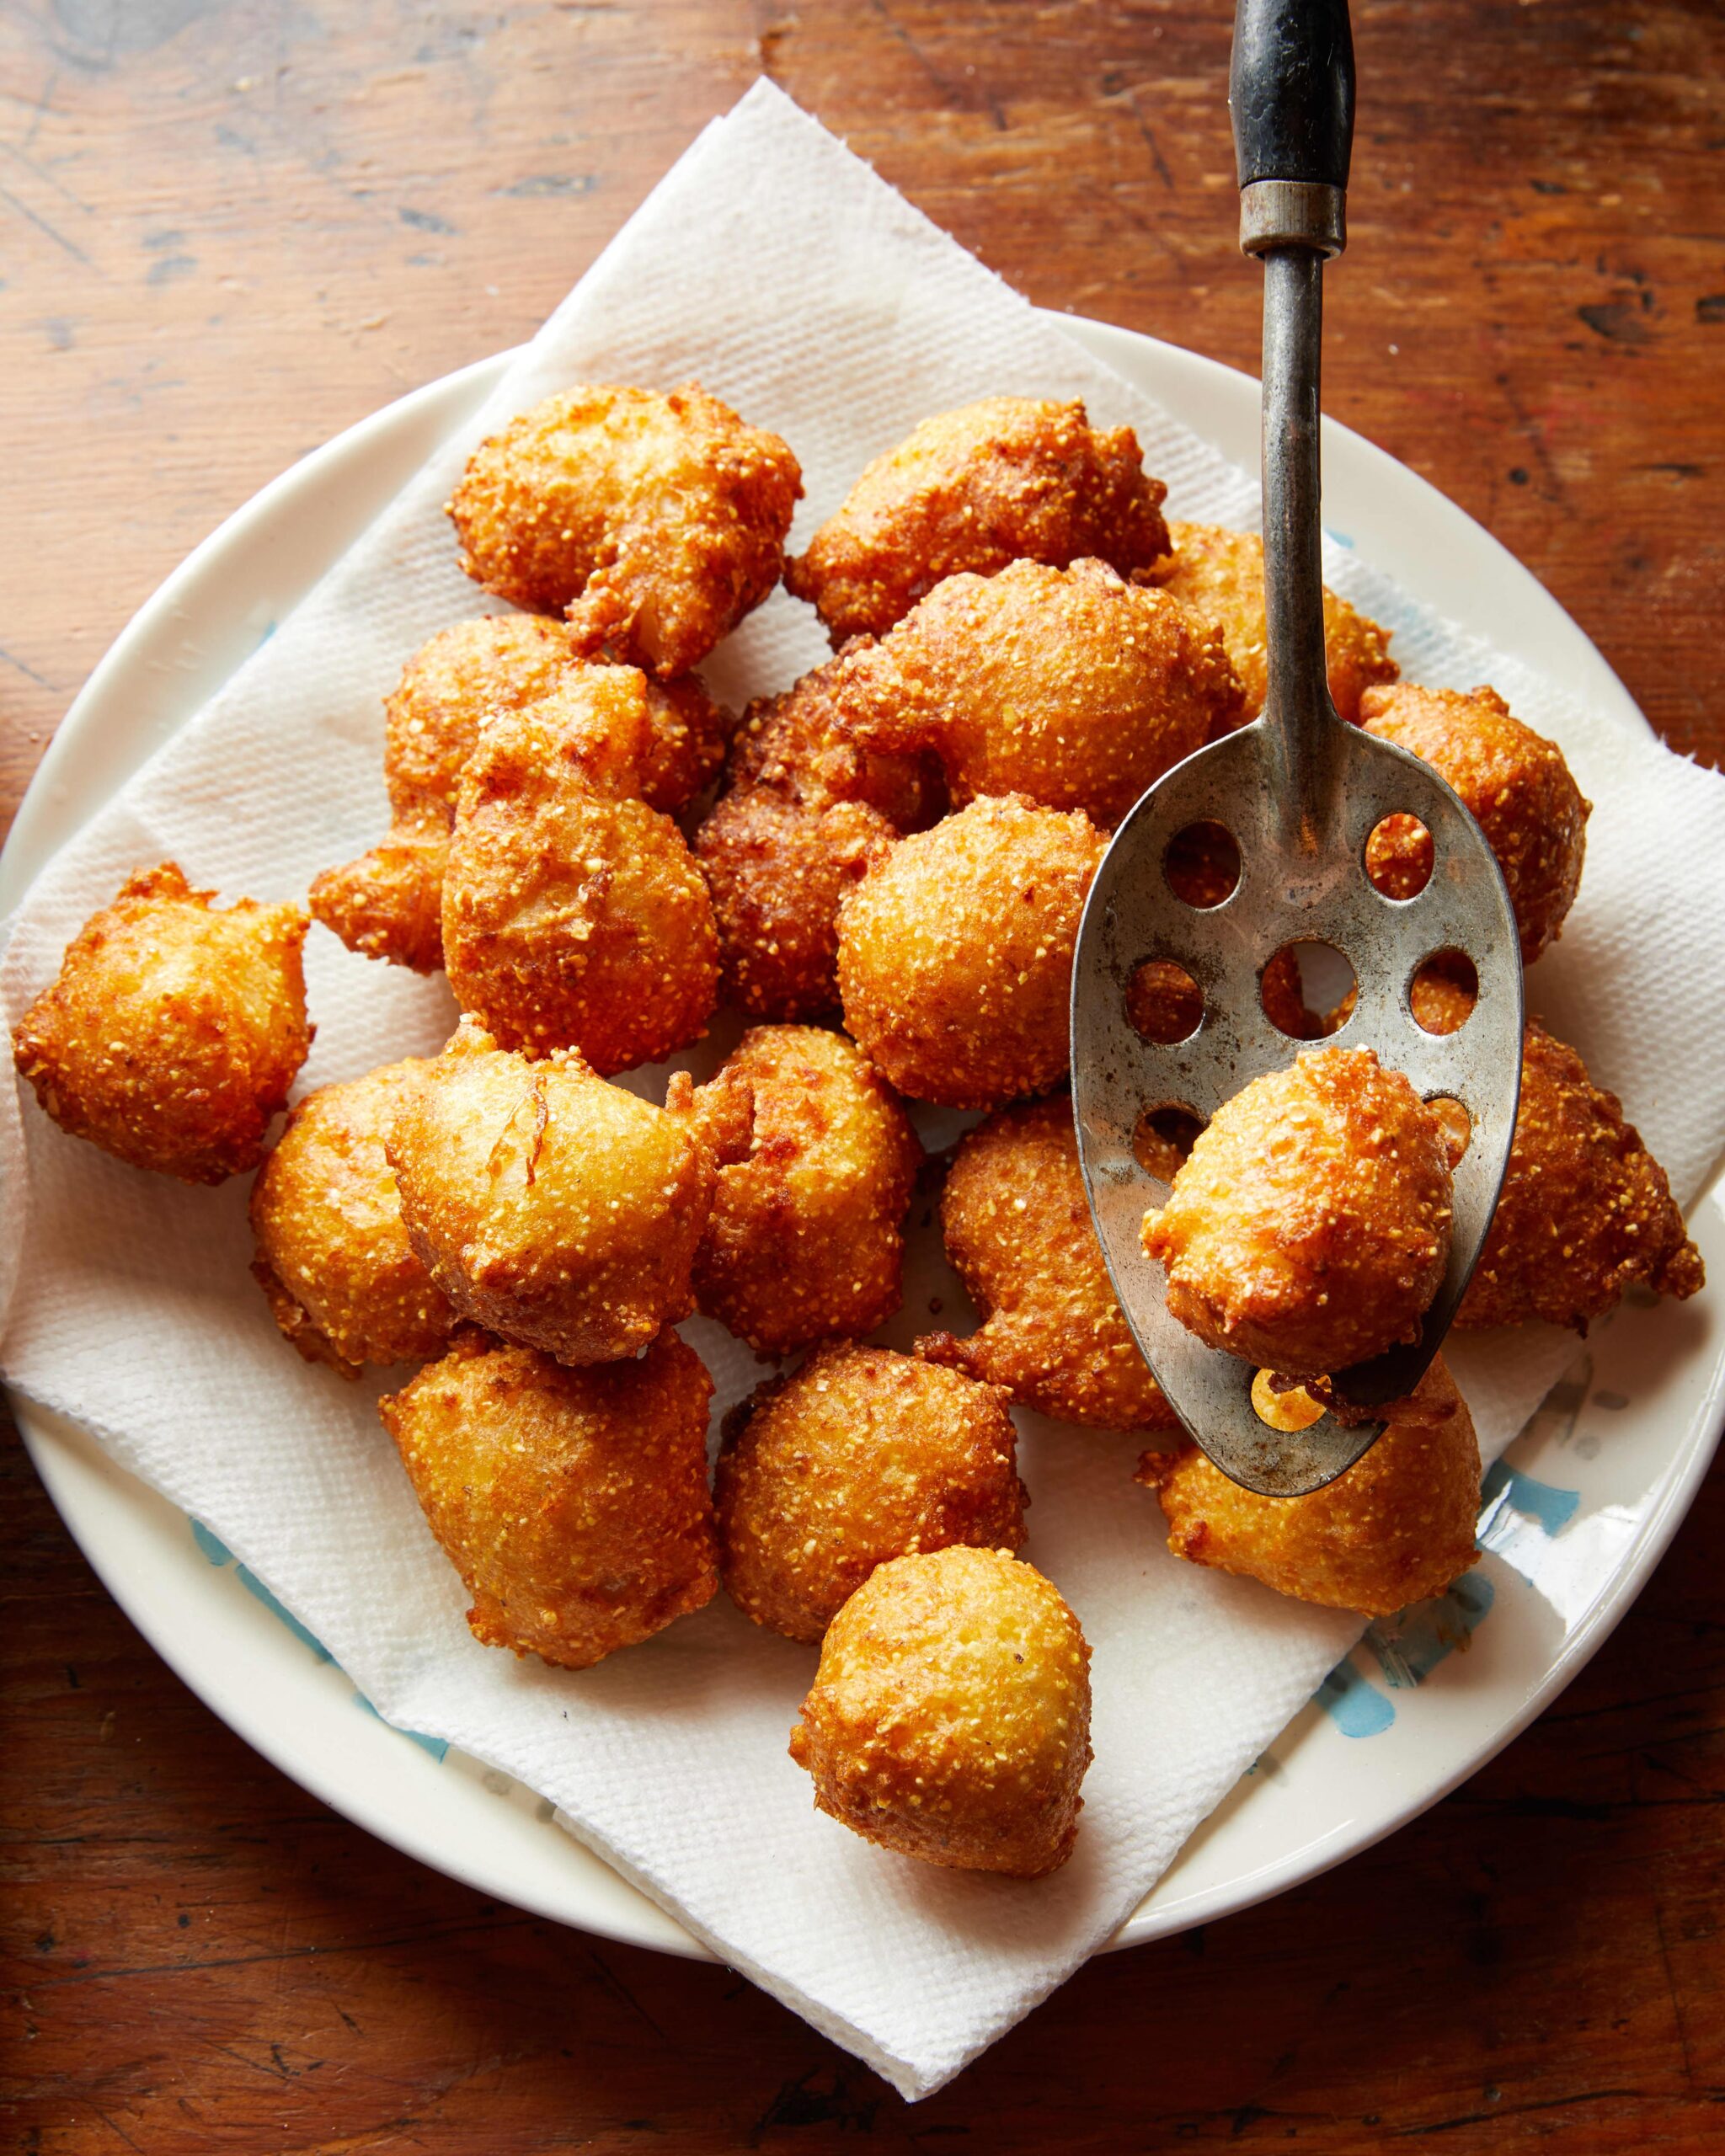  Your taste buds will thank you for trying Frank's Southern Hush Puppies.